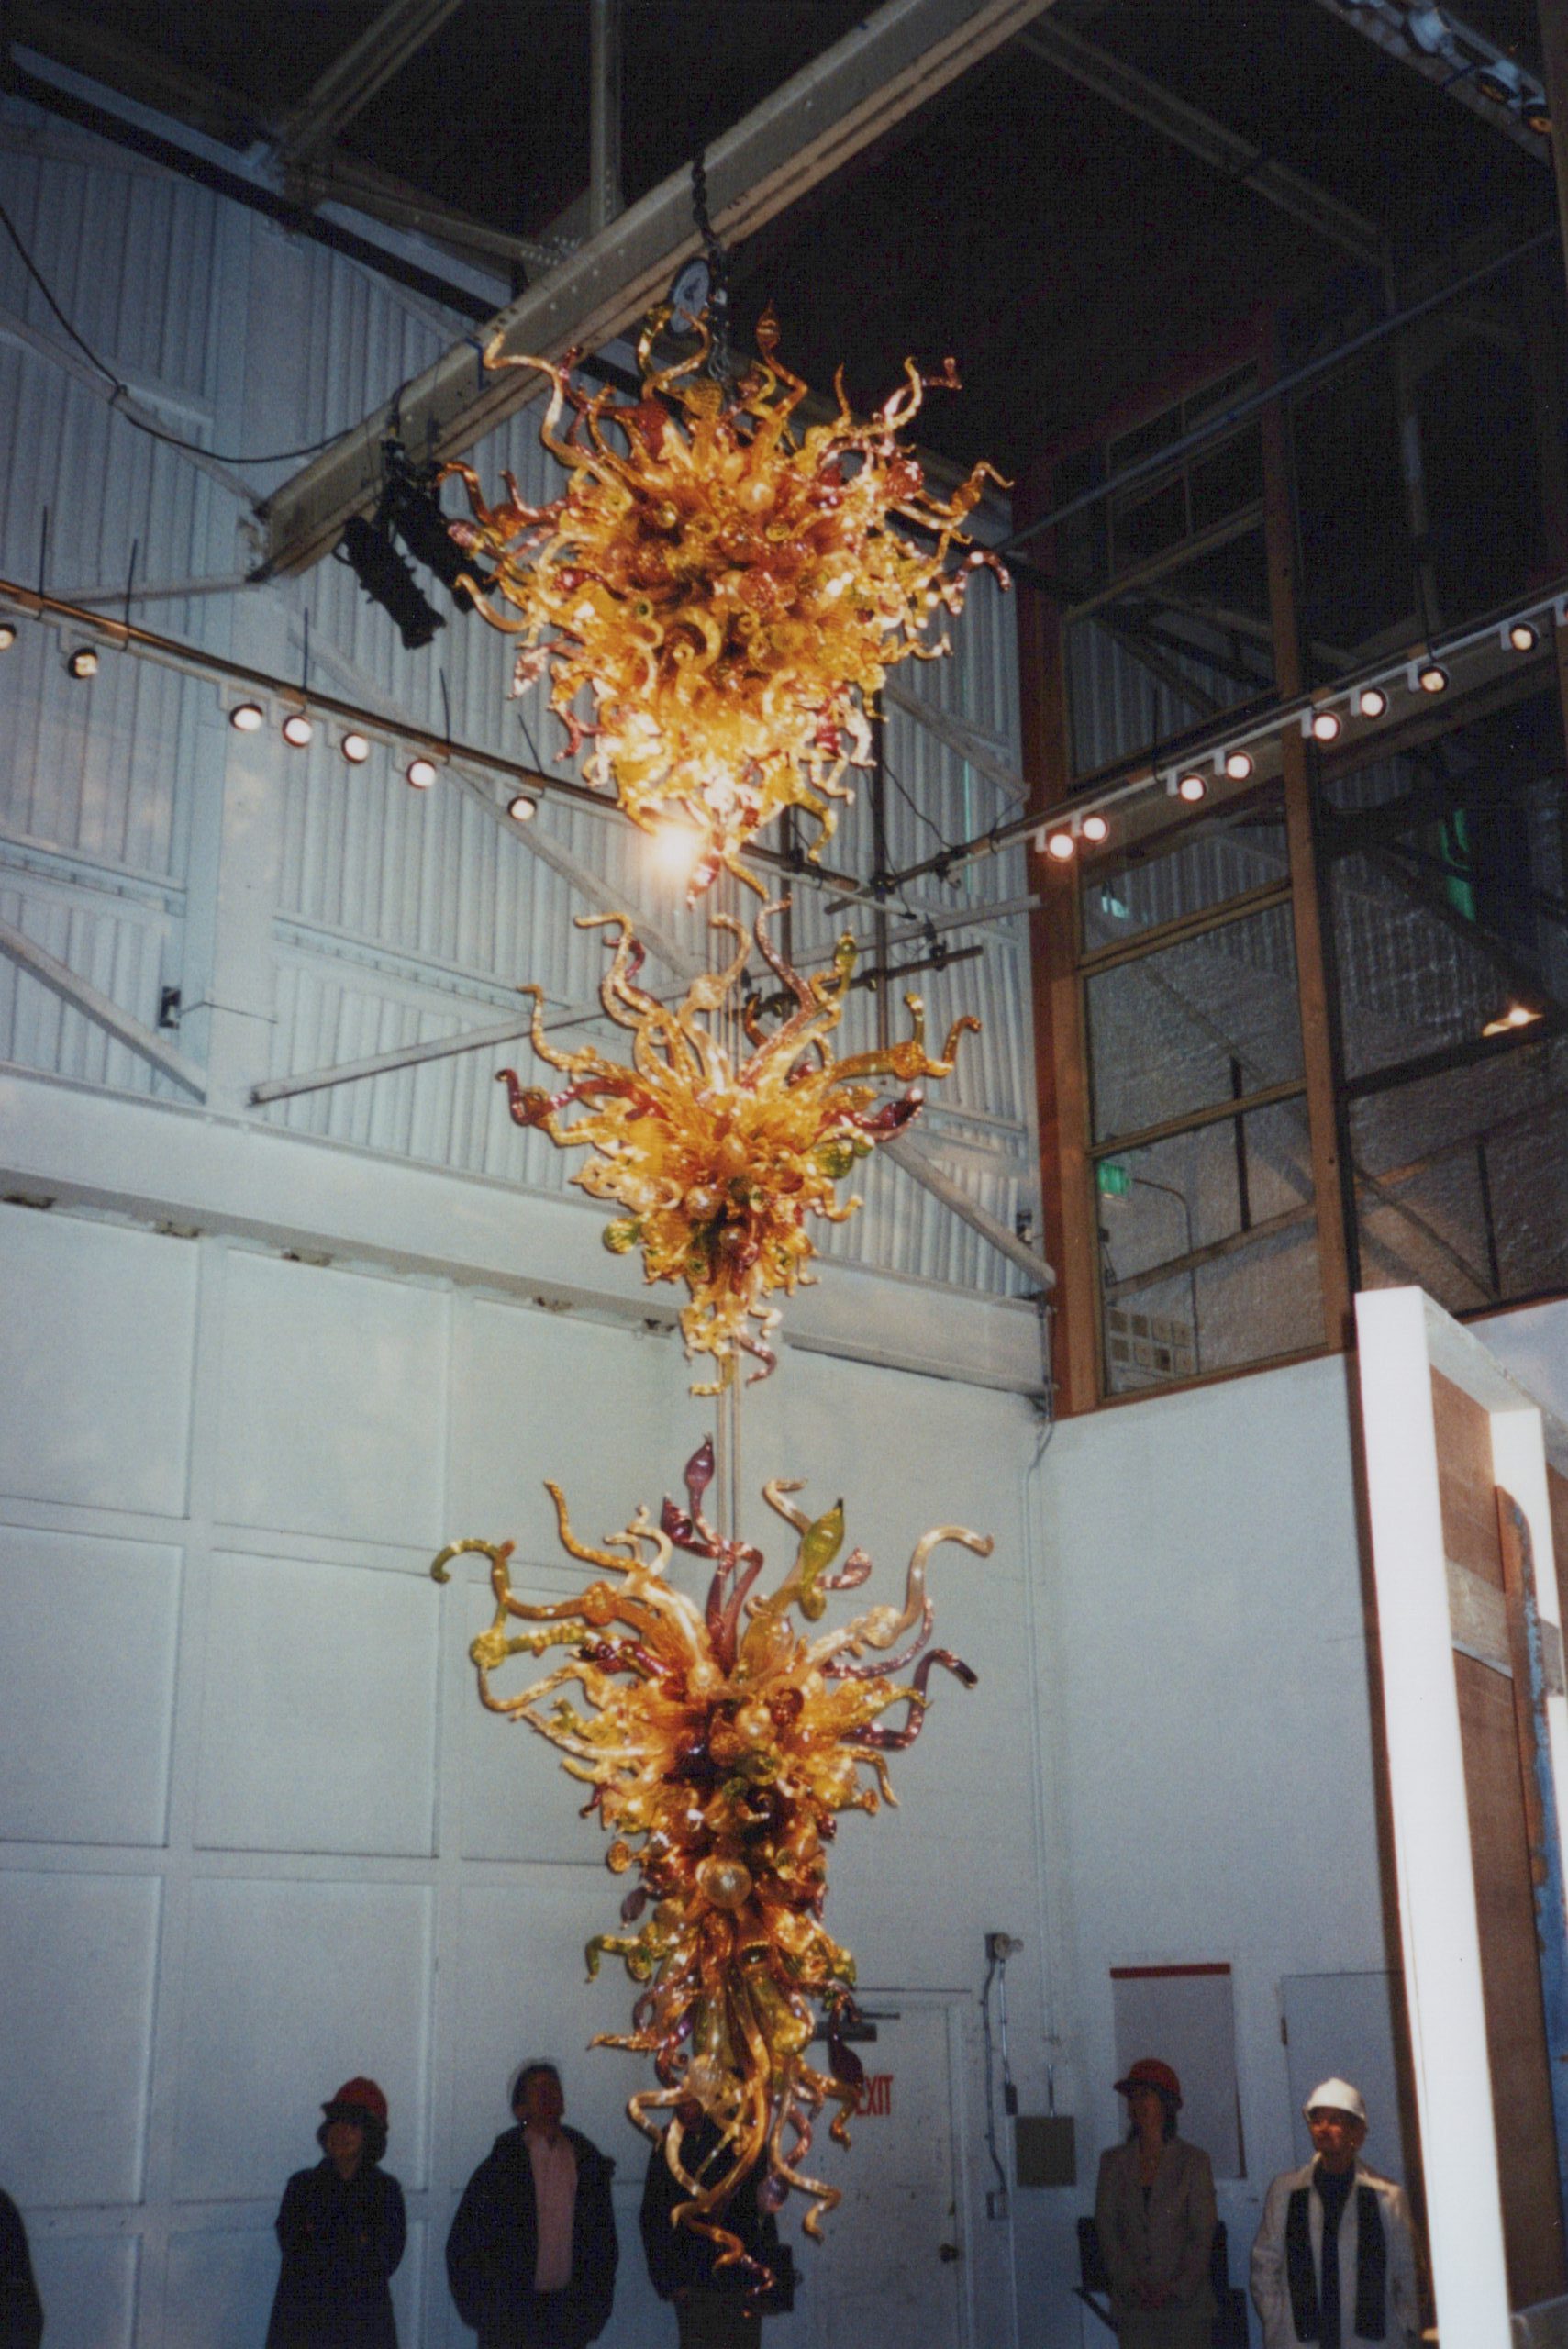 An intricate glass sculpture hangs in a warehouse while people below look at it.